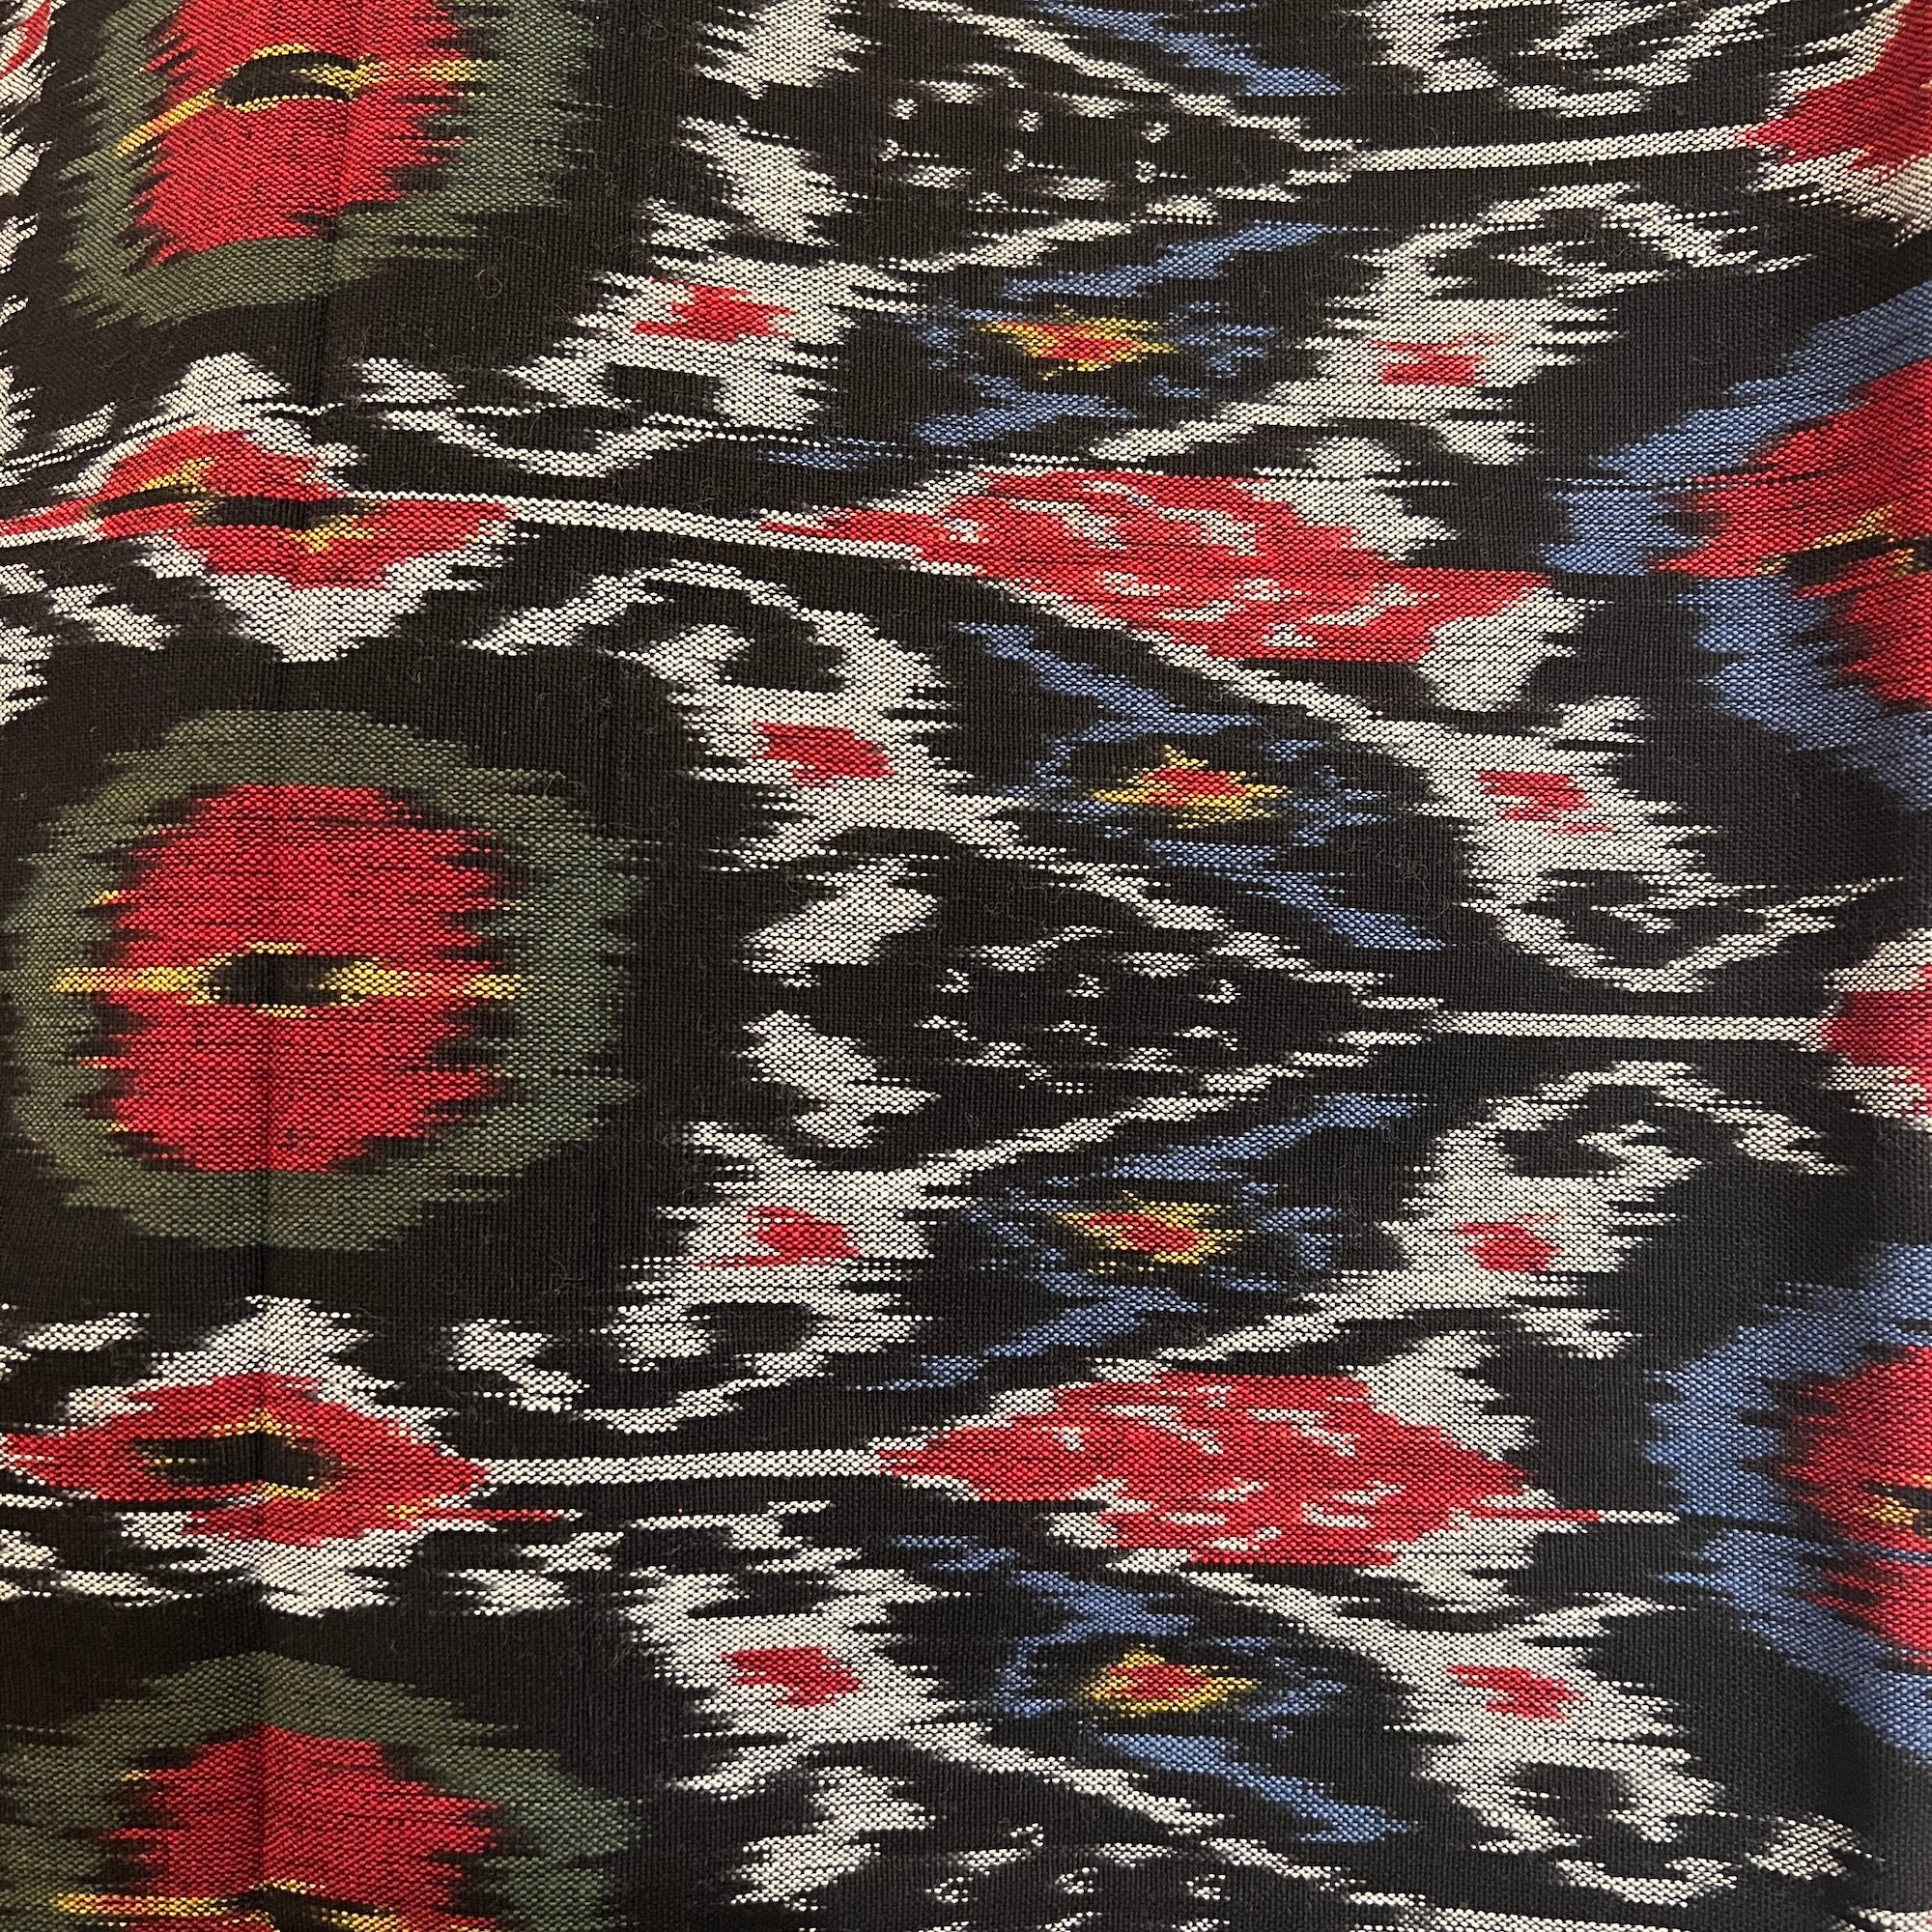 Ikat Bedcover/Tablecloth - Vintage India NYC